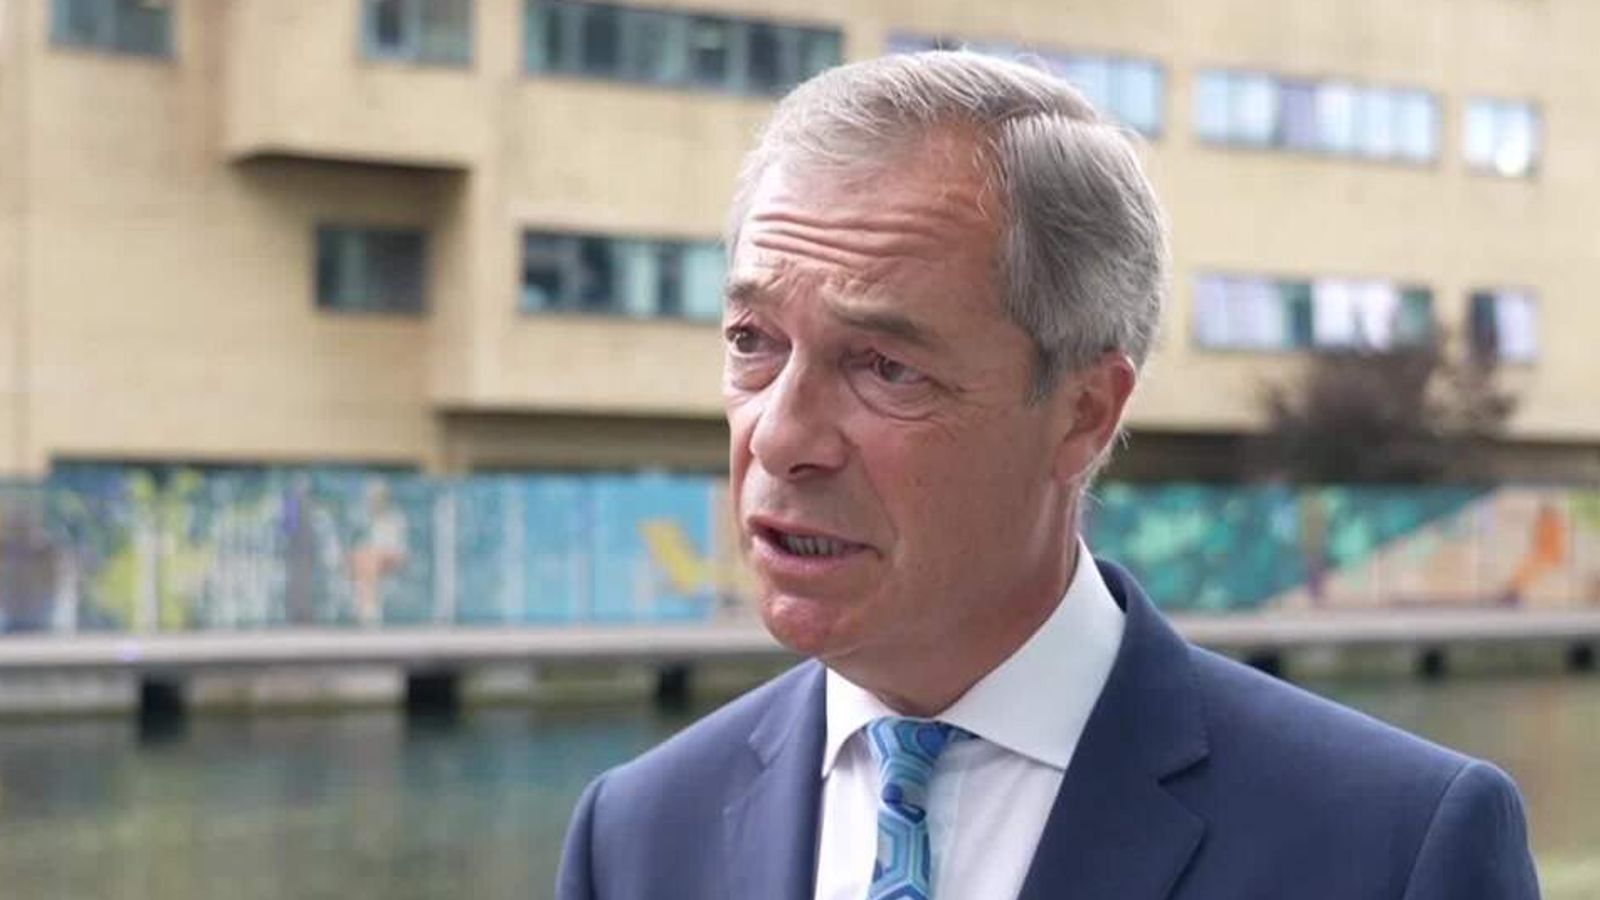 Nigel Farage on 'vitriol' in document he claims shows why Coutts bank account was closed